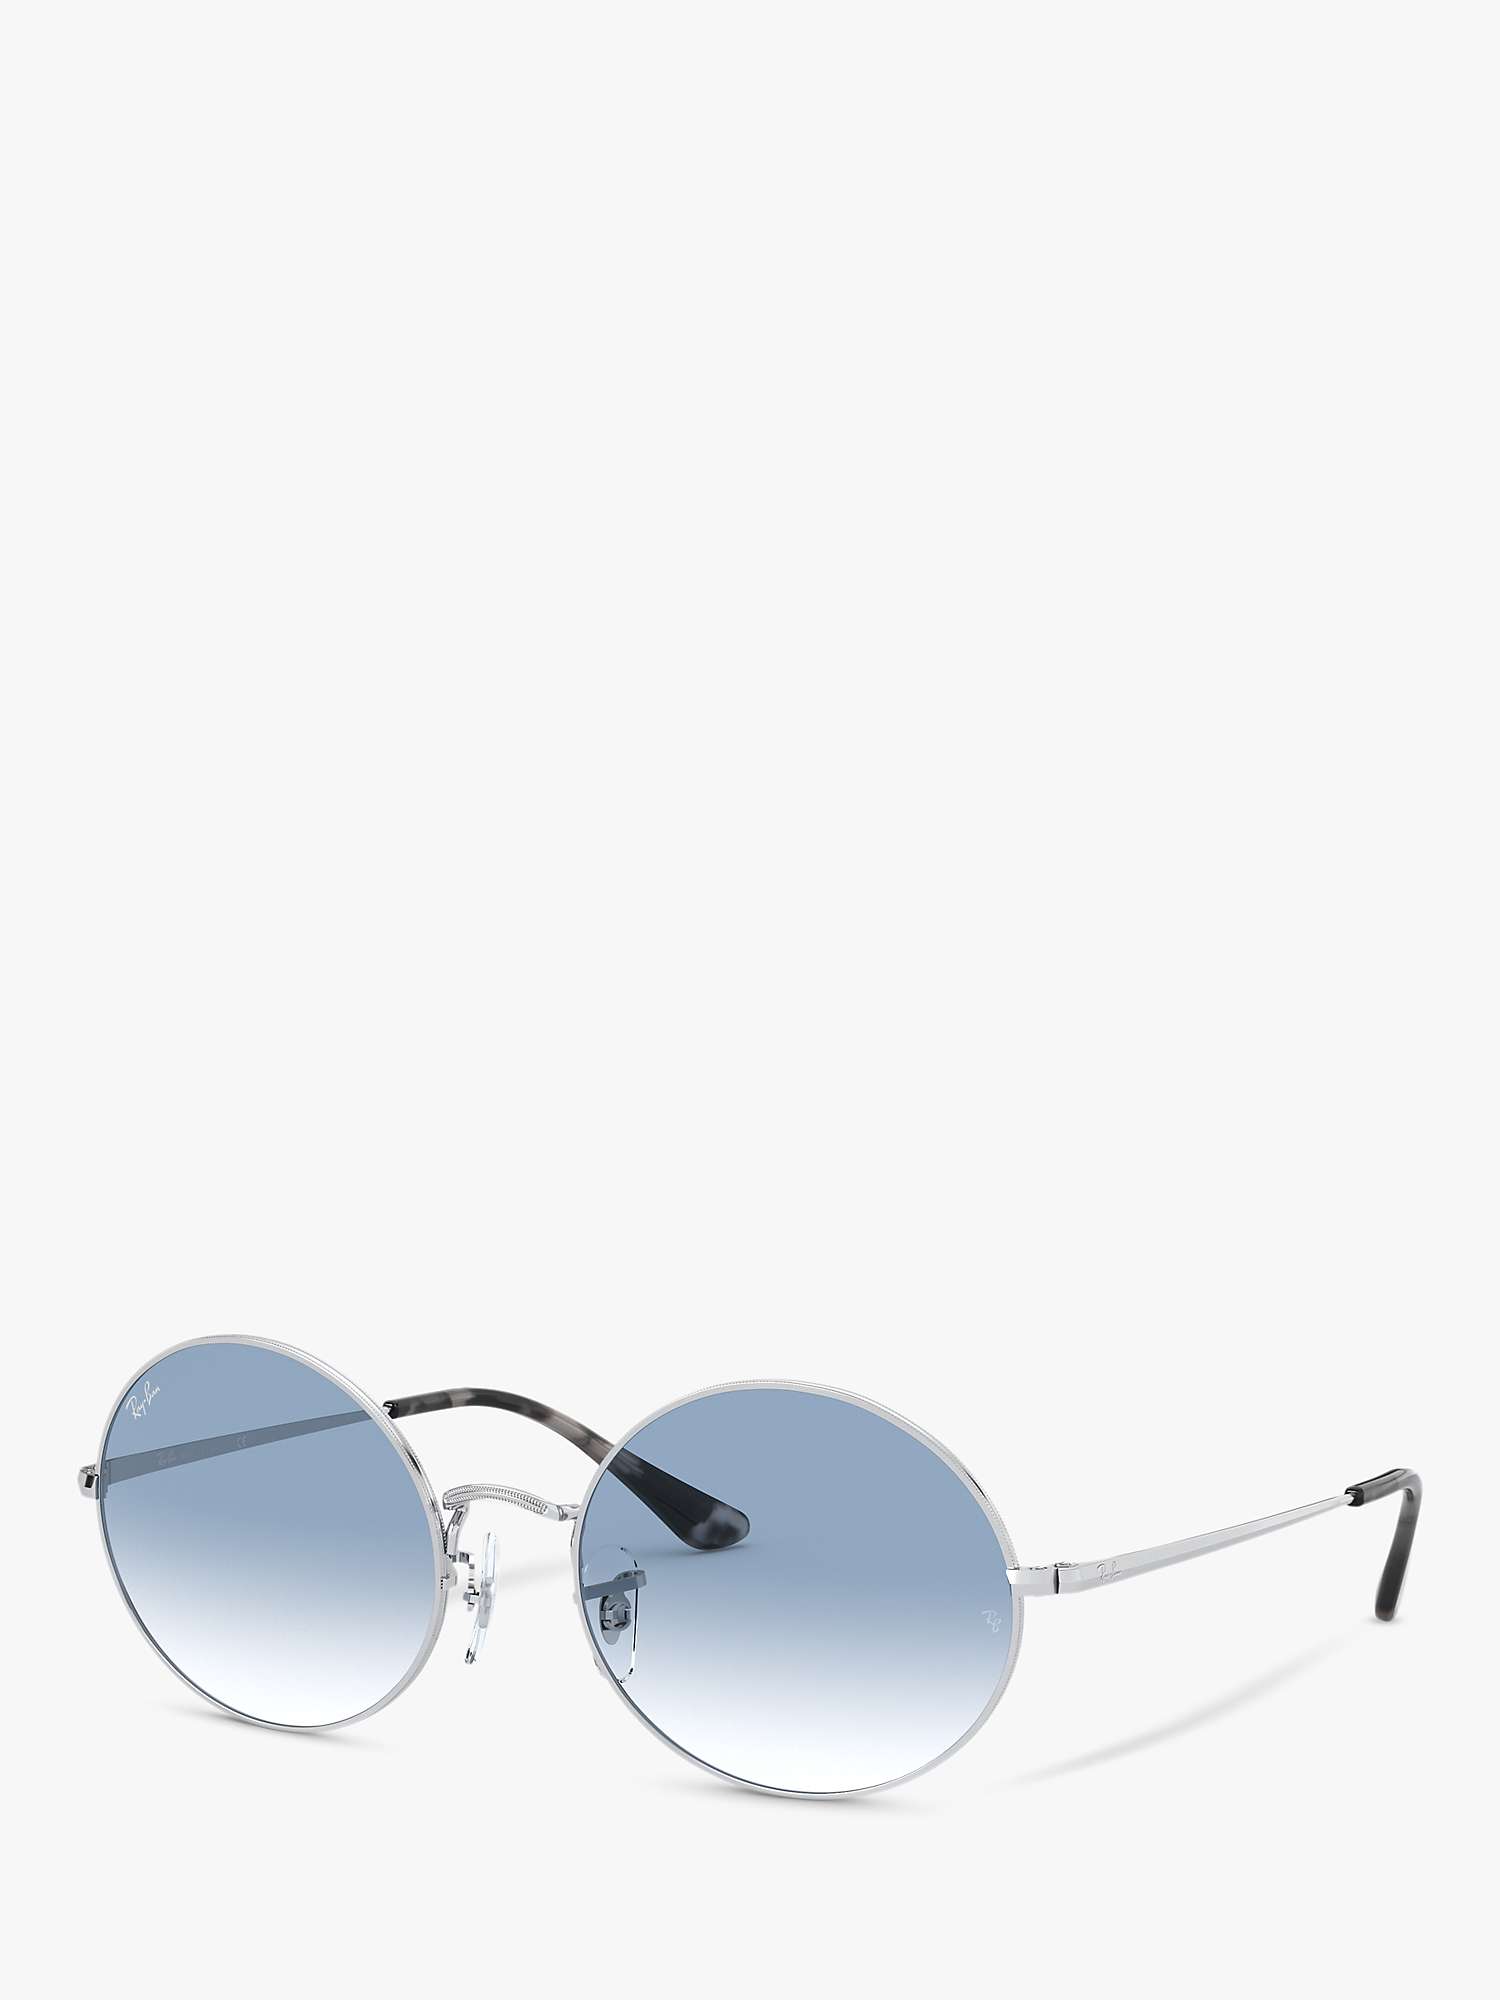 Buy Ray-Ban RB1970 Unisex Oval Sunglasses, Silver/Light Blue Gradient Online at johnlewis.com